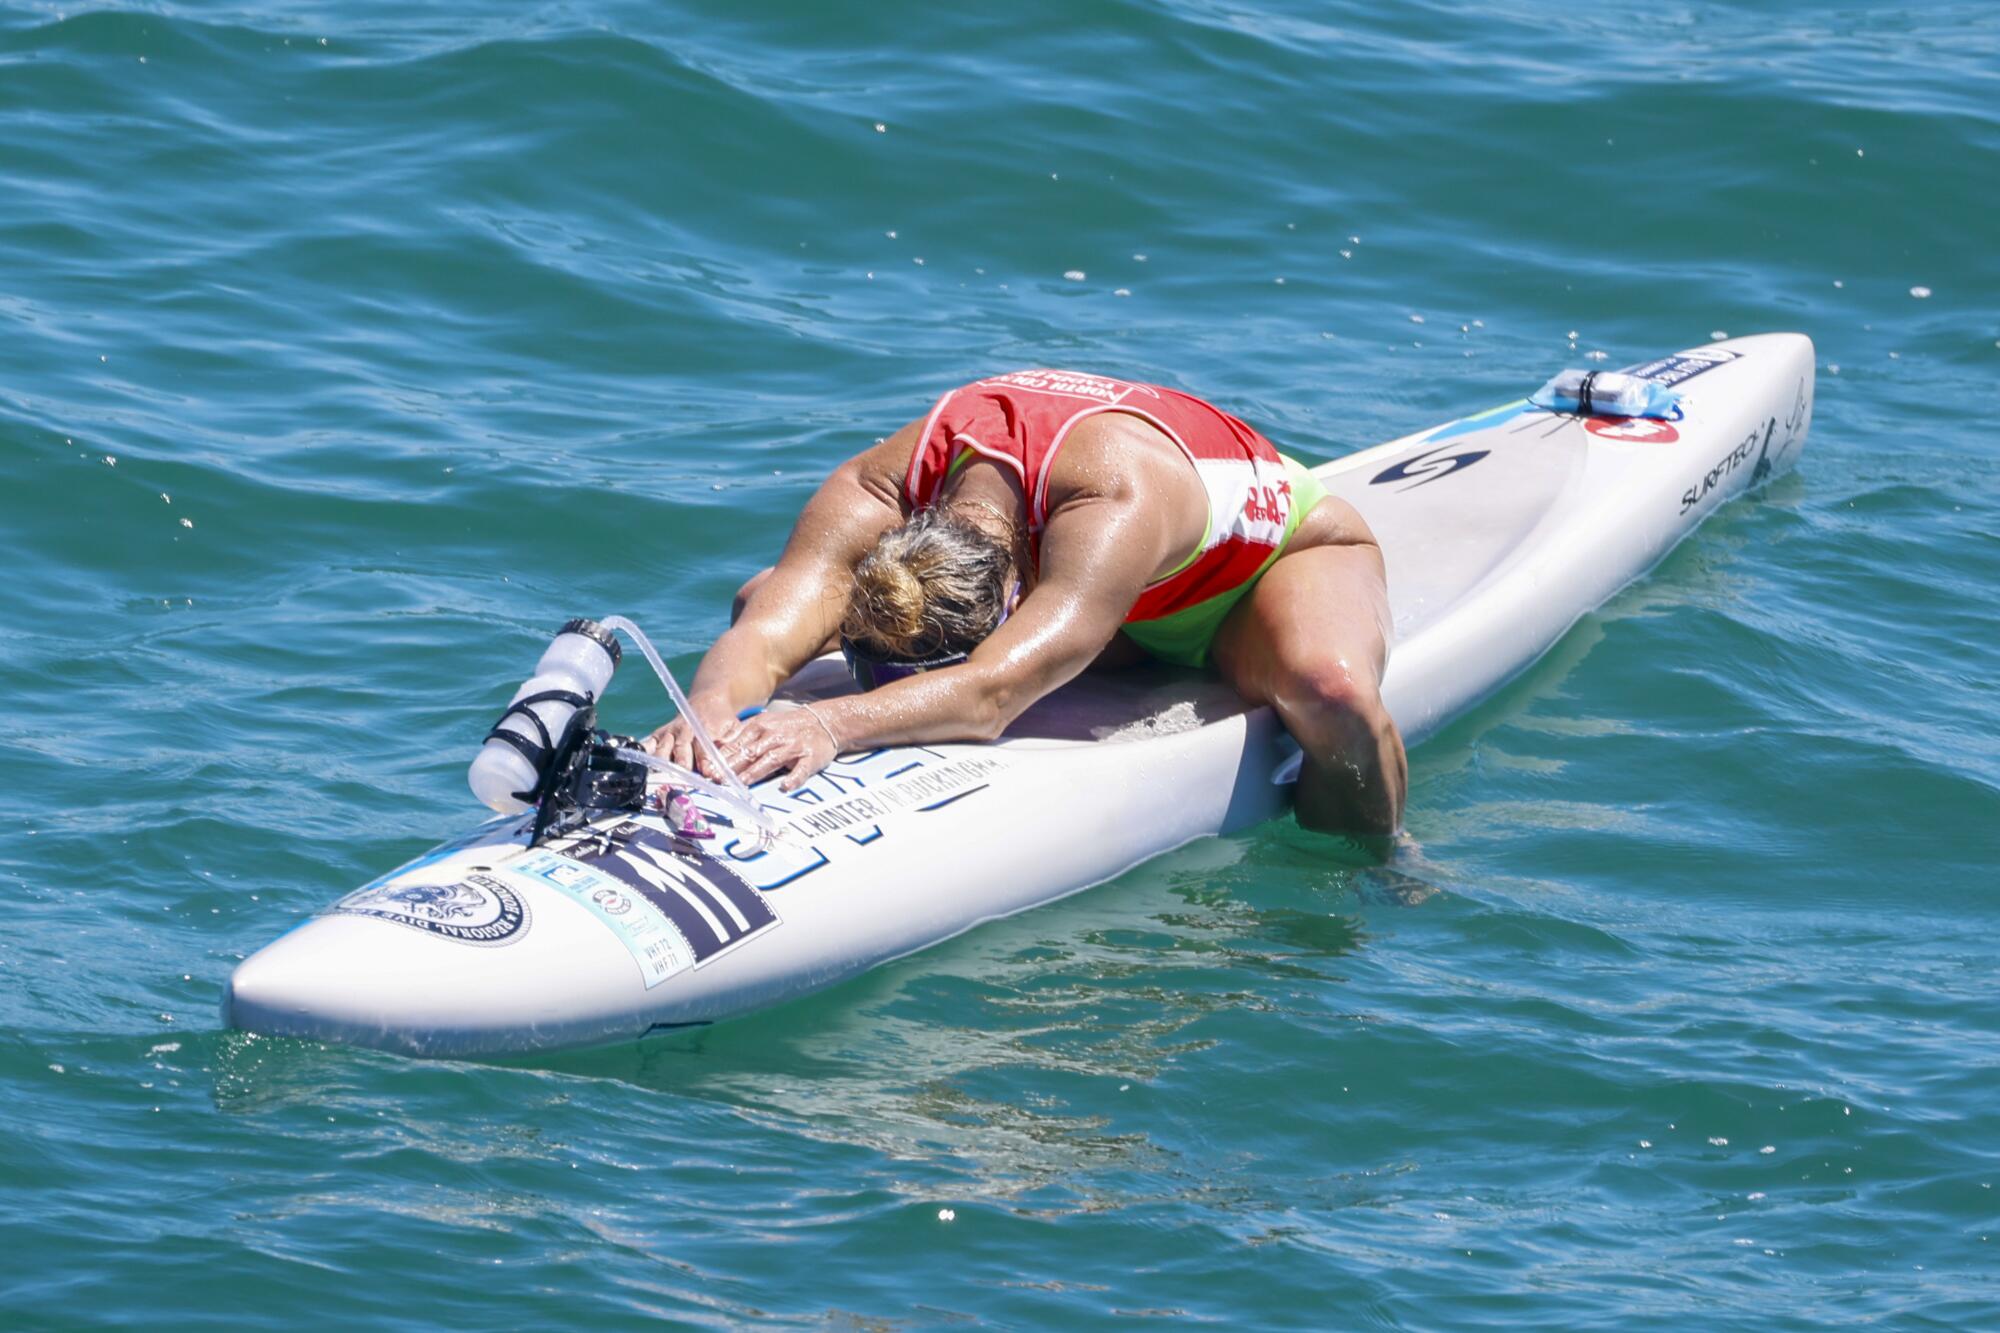 Liz Hunter collapses after winning the women's division of the 2023 Catalina Classic Paddleboard Race